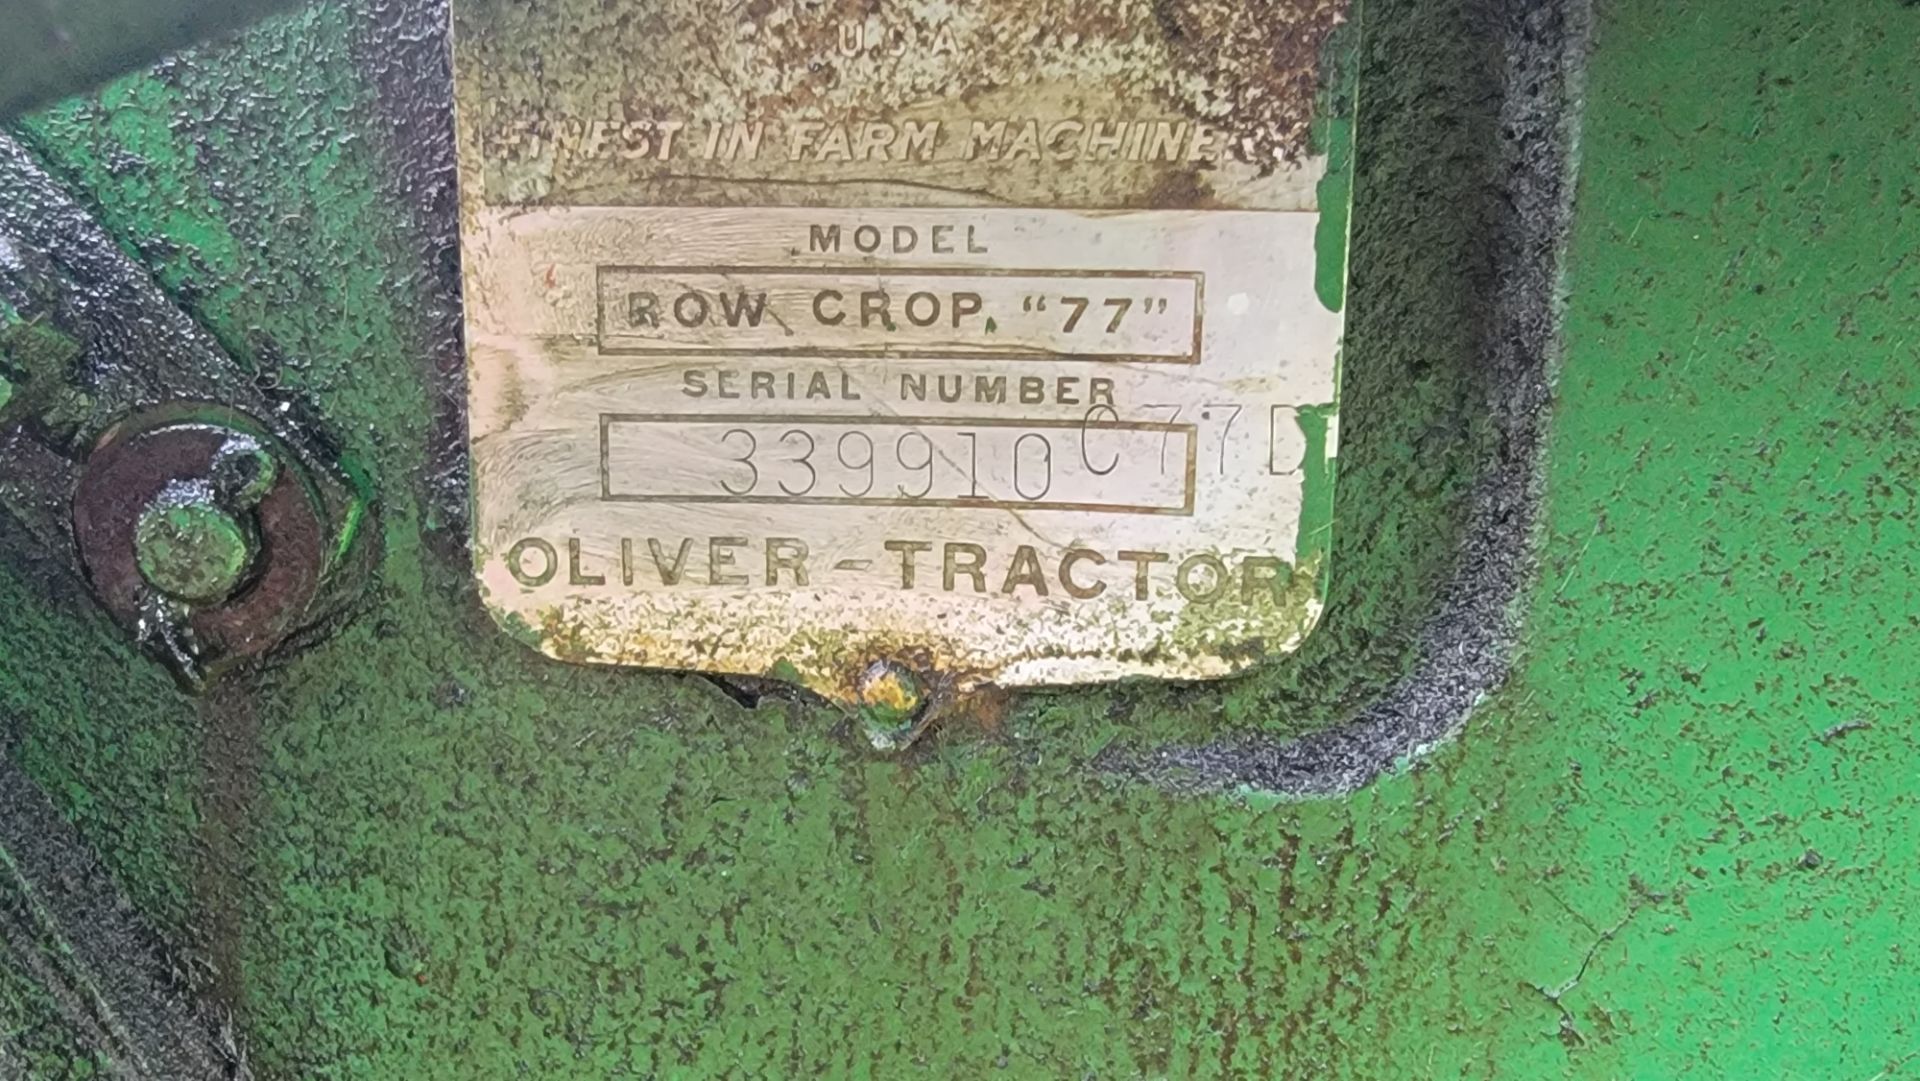 1951 Oliver 77 Row Crop Tractor, 6 Cylinder Gasoline Engine, Rear Hydraulics, Restored - Image 12 of 12